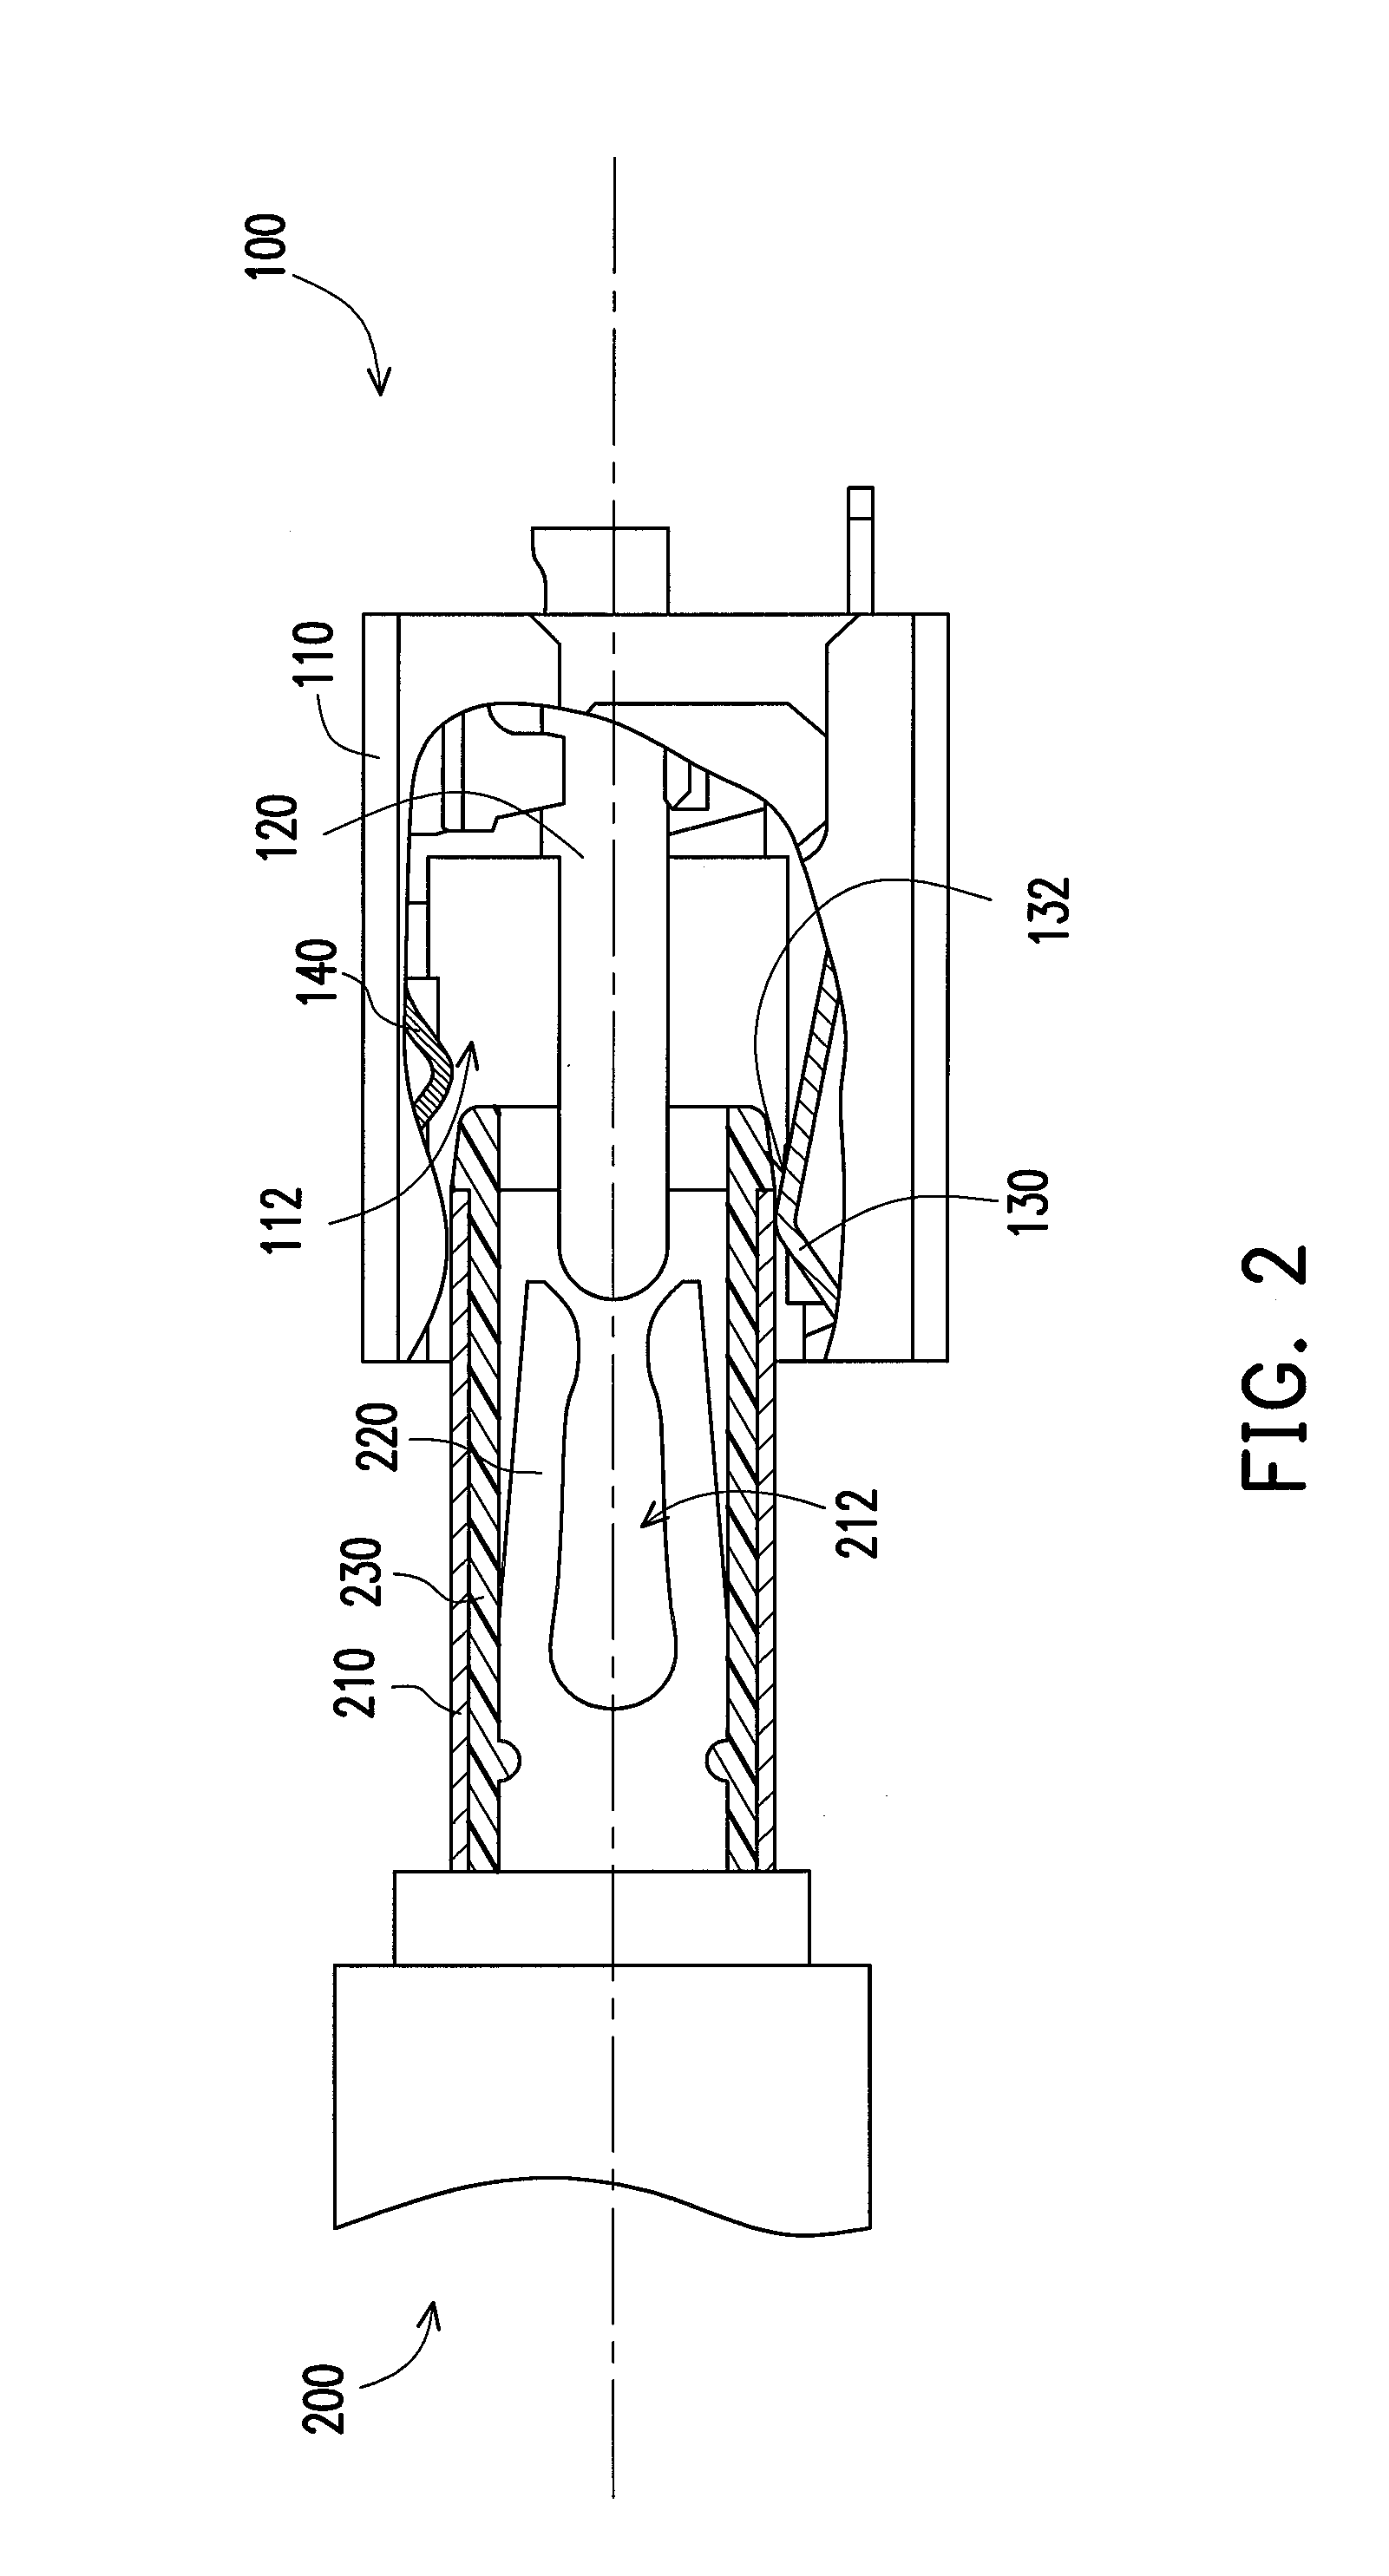 Power receptacle for portable electronic device